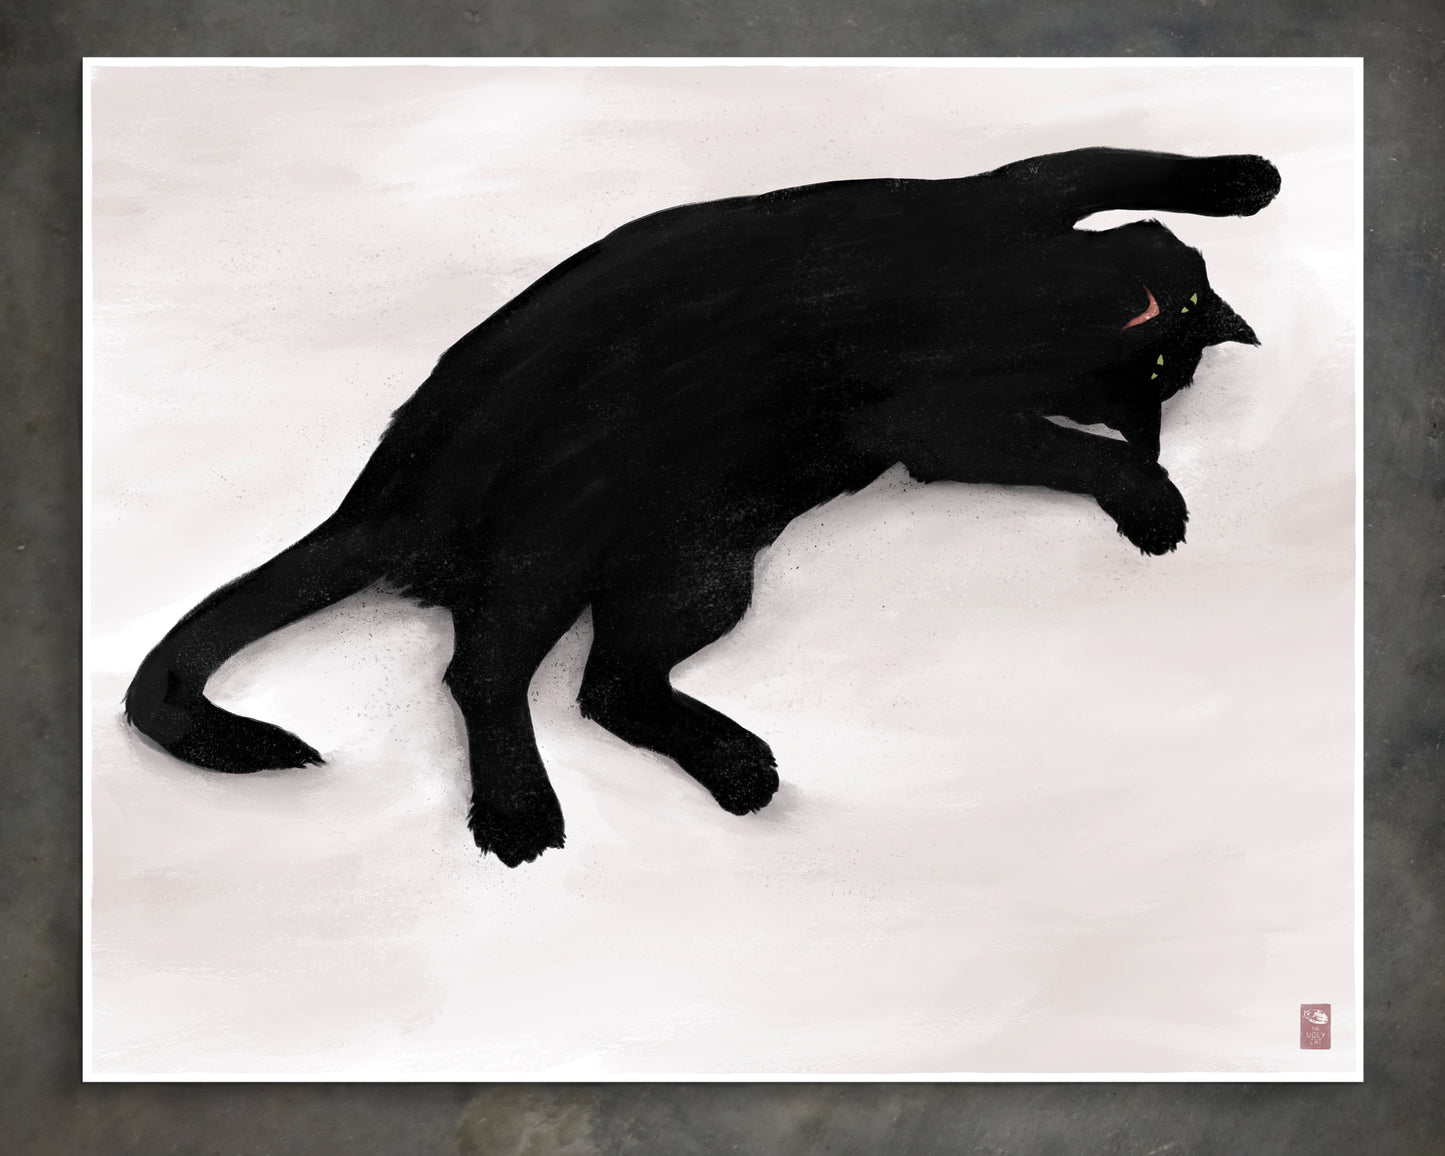 "Sillhouette of Woodhouse" by Catherine Hébert - Cat Silhouette Giclee Art Print